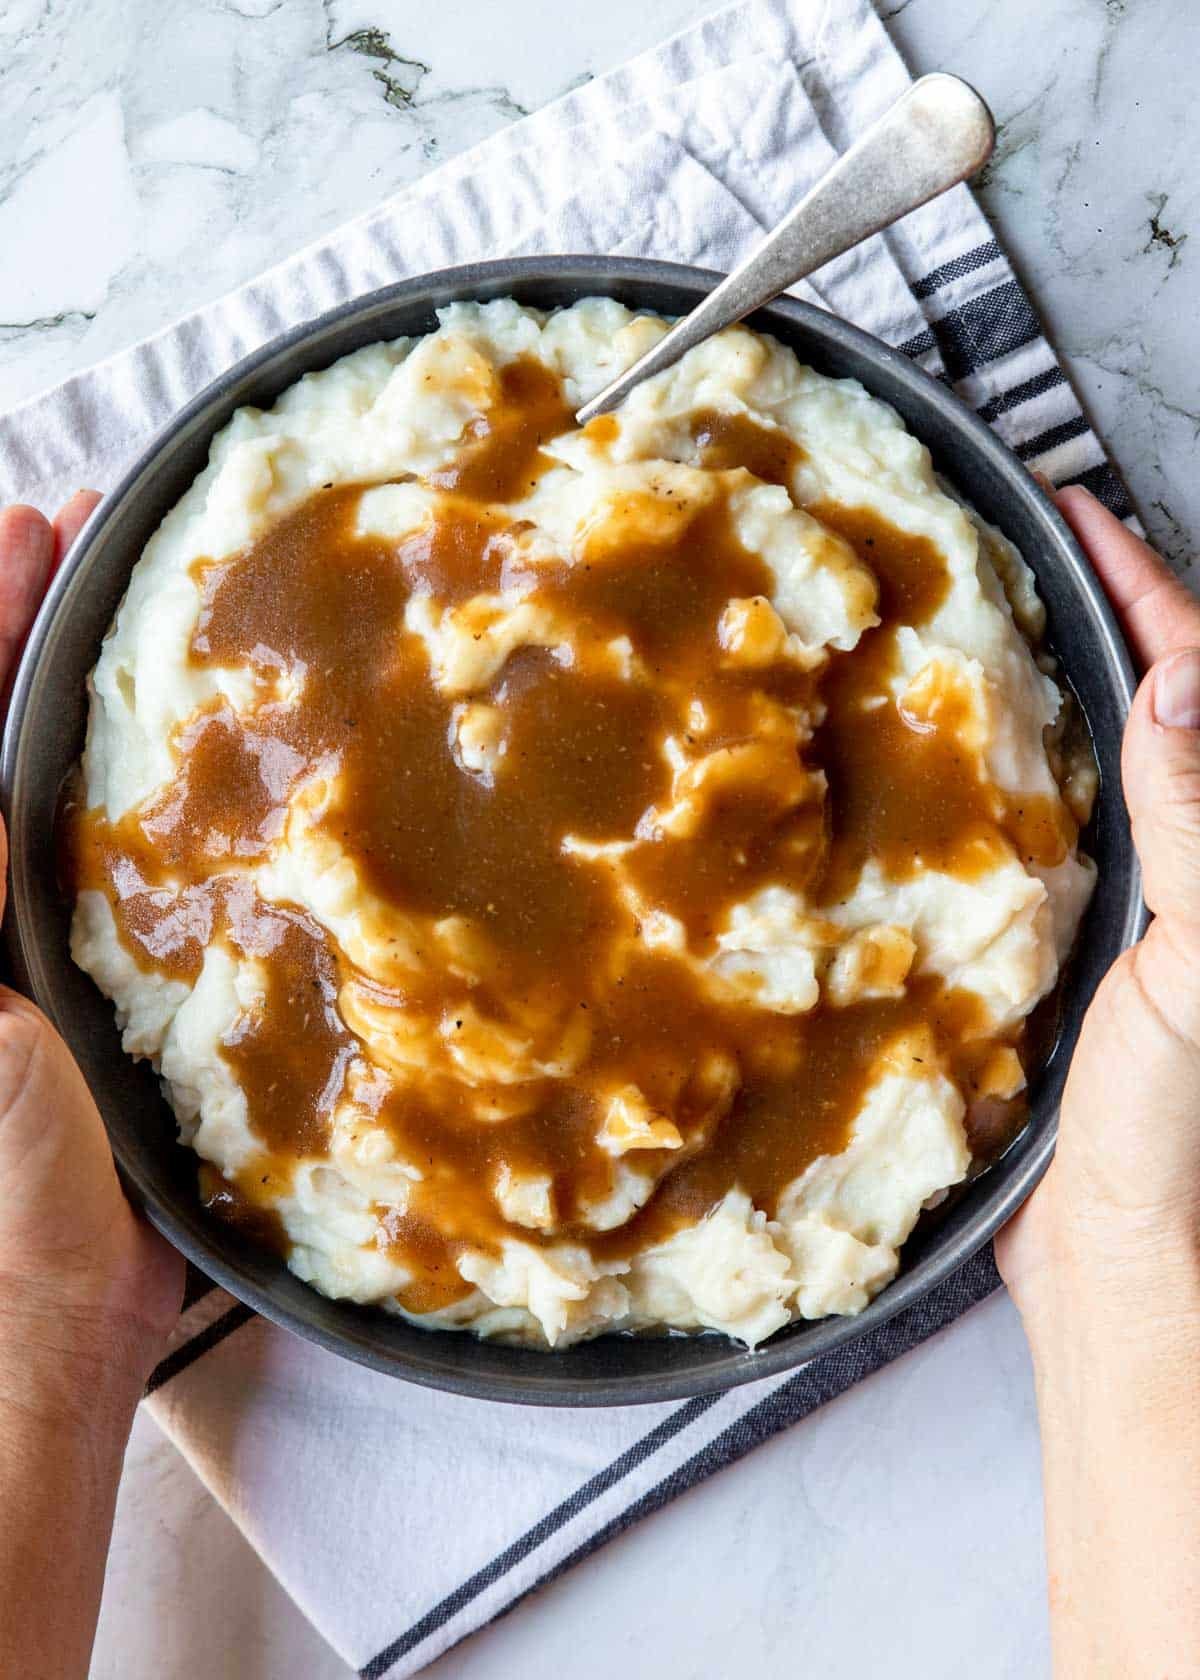 two hands holding a bowl of mashed potatoes with brown gravy poured over top